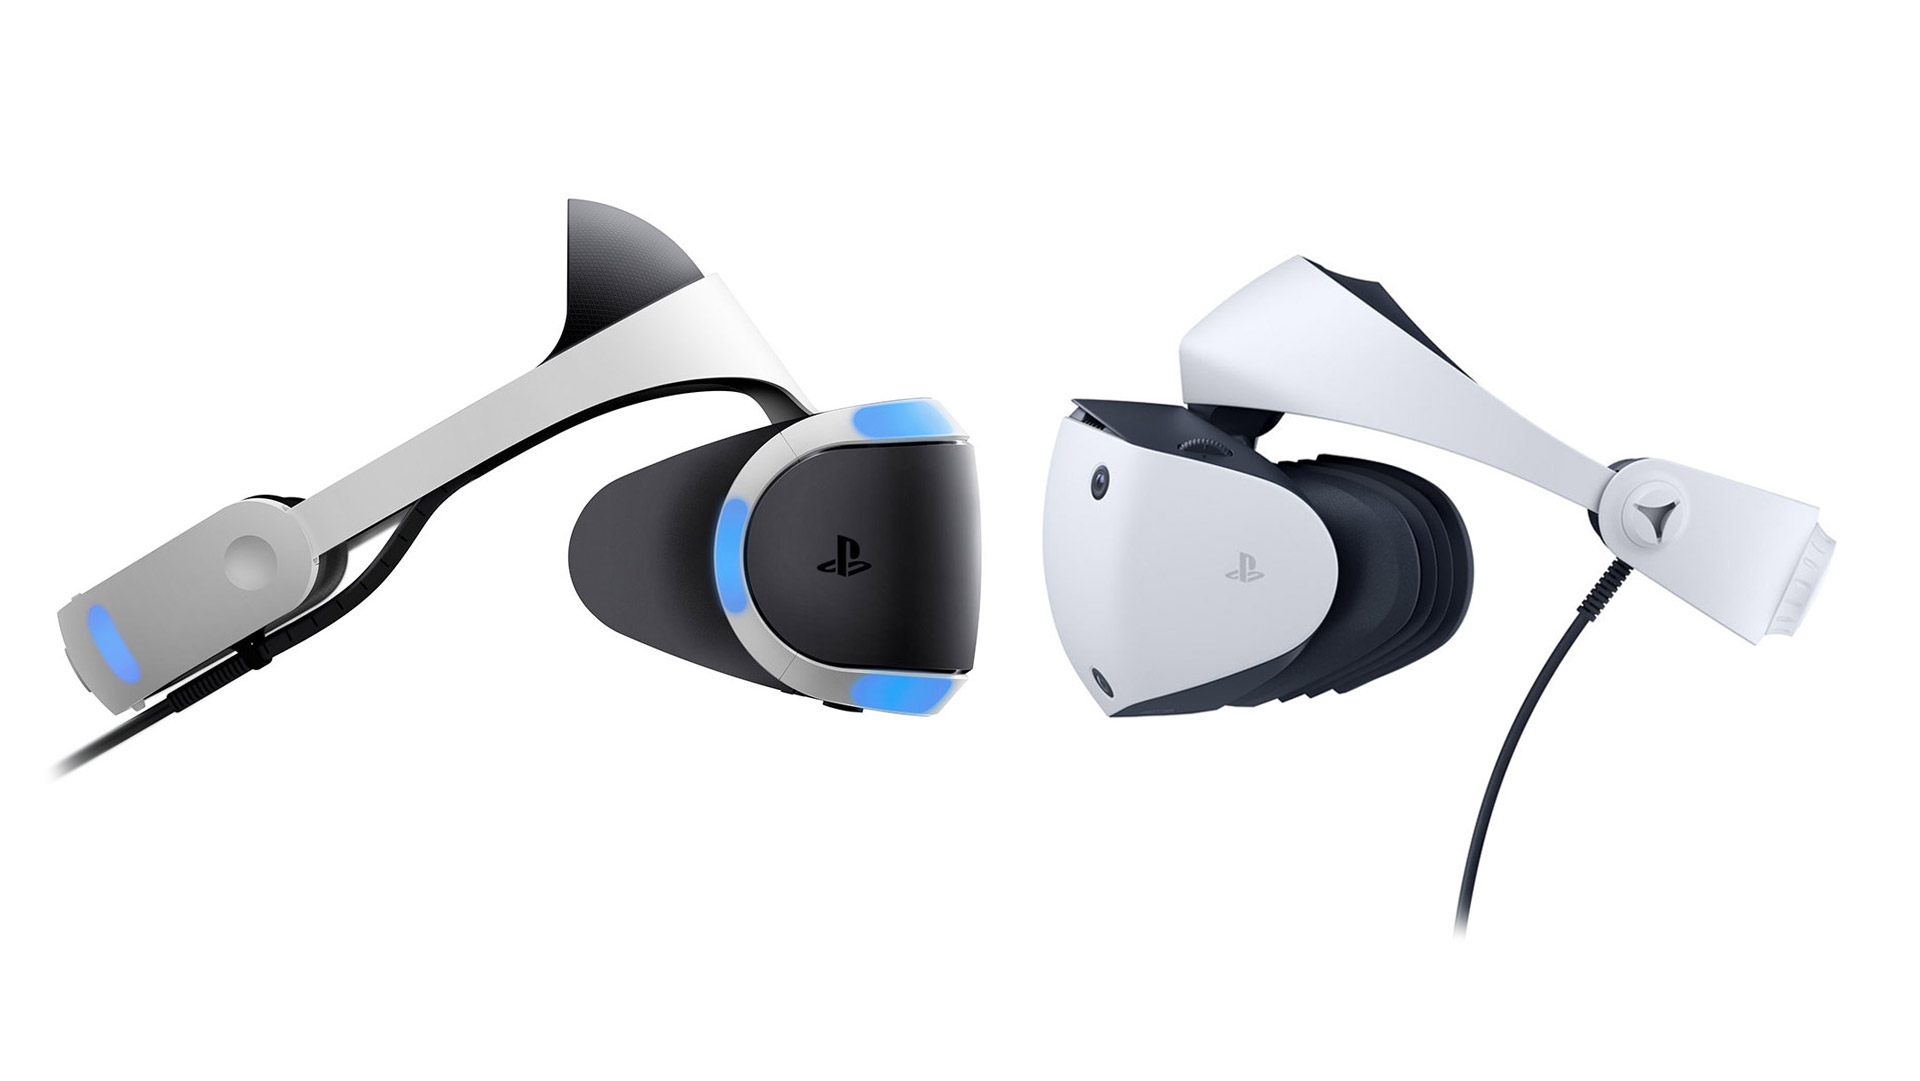 PSVR’s Top Downloads in 2023 Betray Stagnation, PSVR 2 Looks to Change That – Road to VR